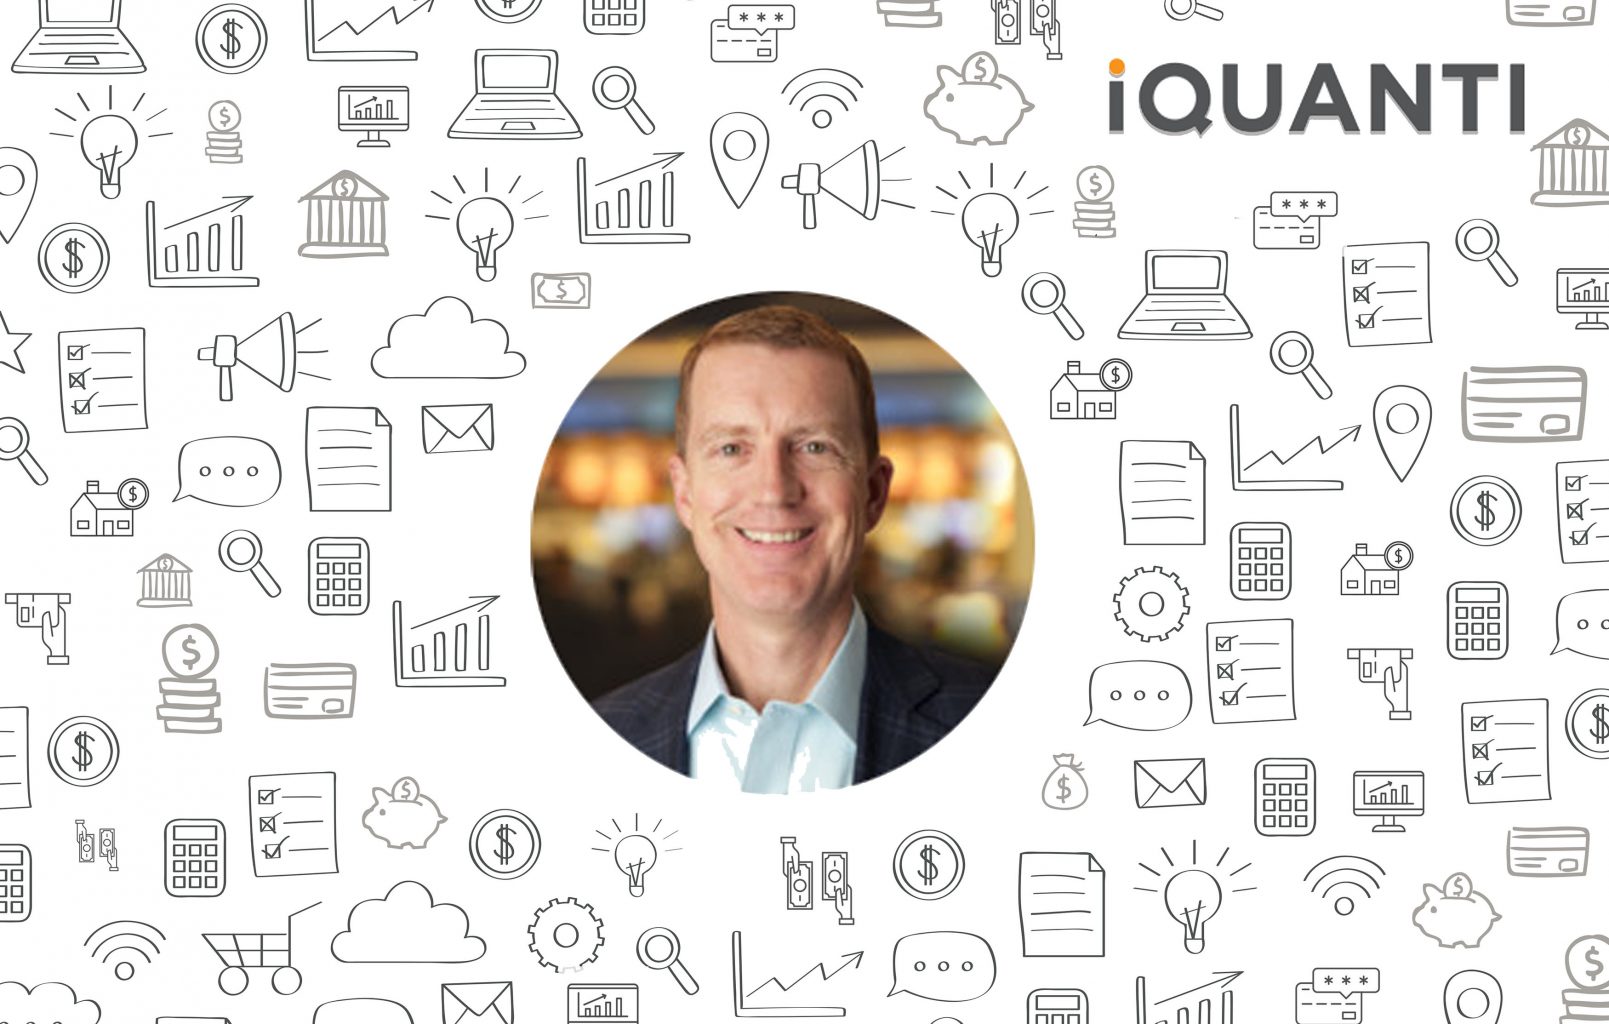 Jerry Canning - Banking And Financial Services Advisor - iQuanti Digital Marketing Company